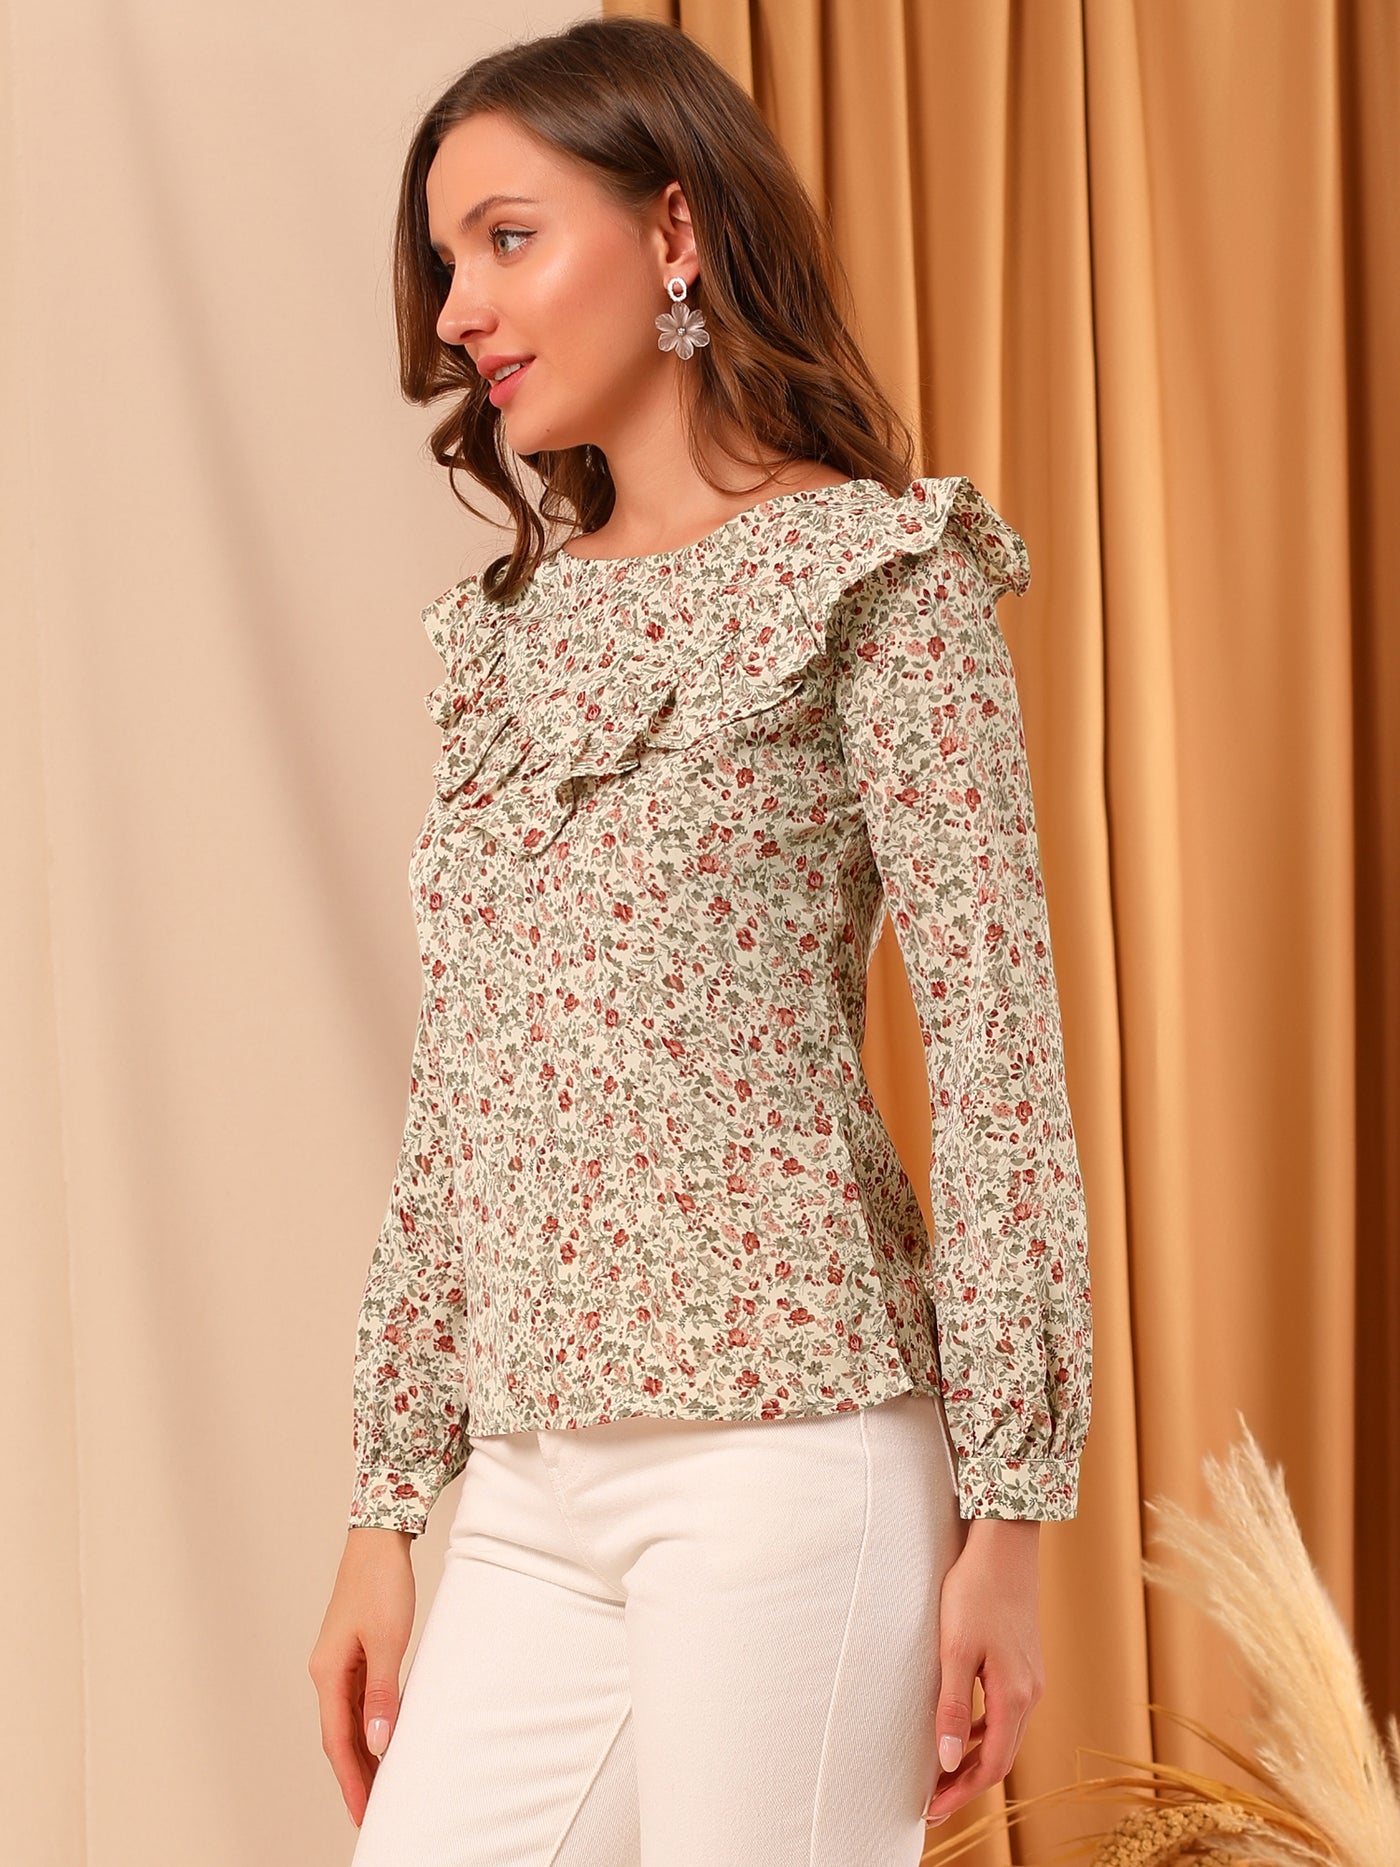 Allegra K Floral Top Long Sleeve Round Neck Vintage Ruffle Blouse